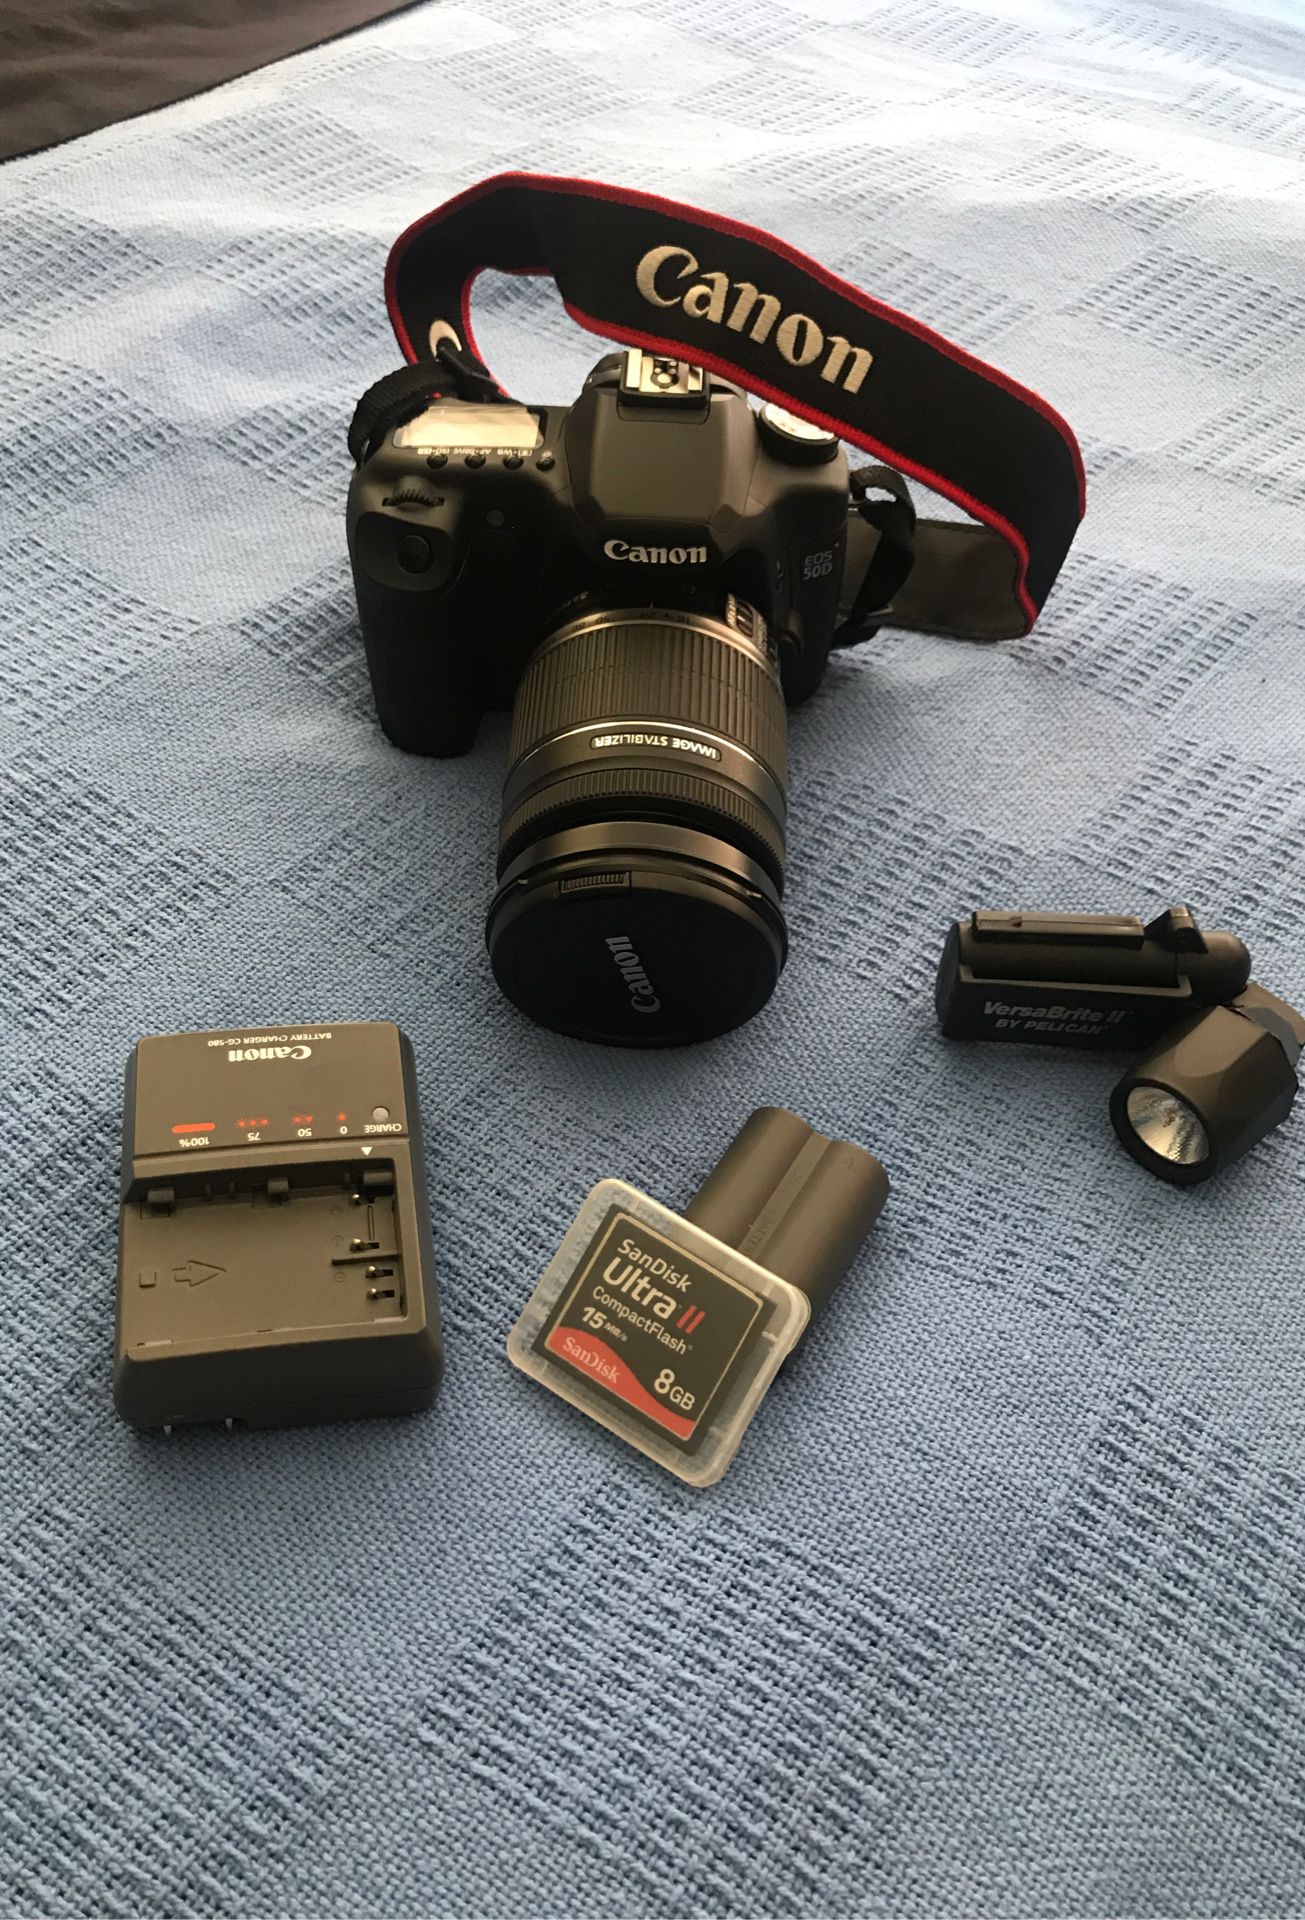 Canon eos 50D. And accessories.